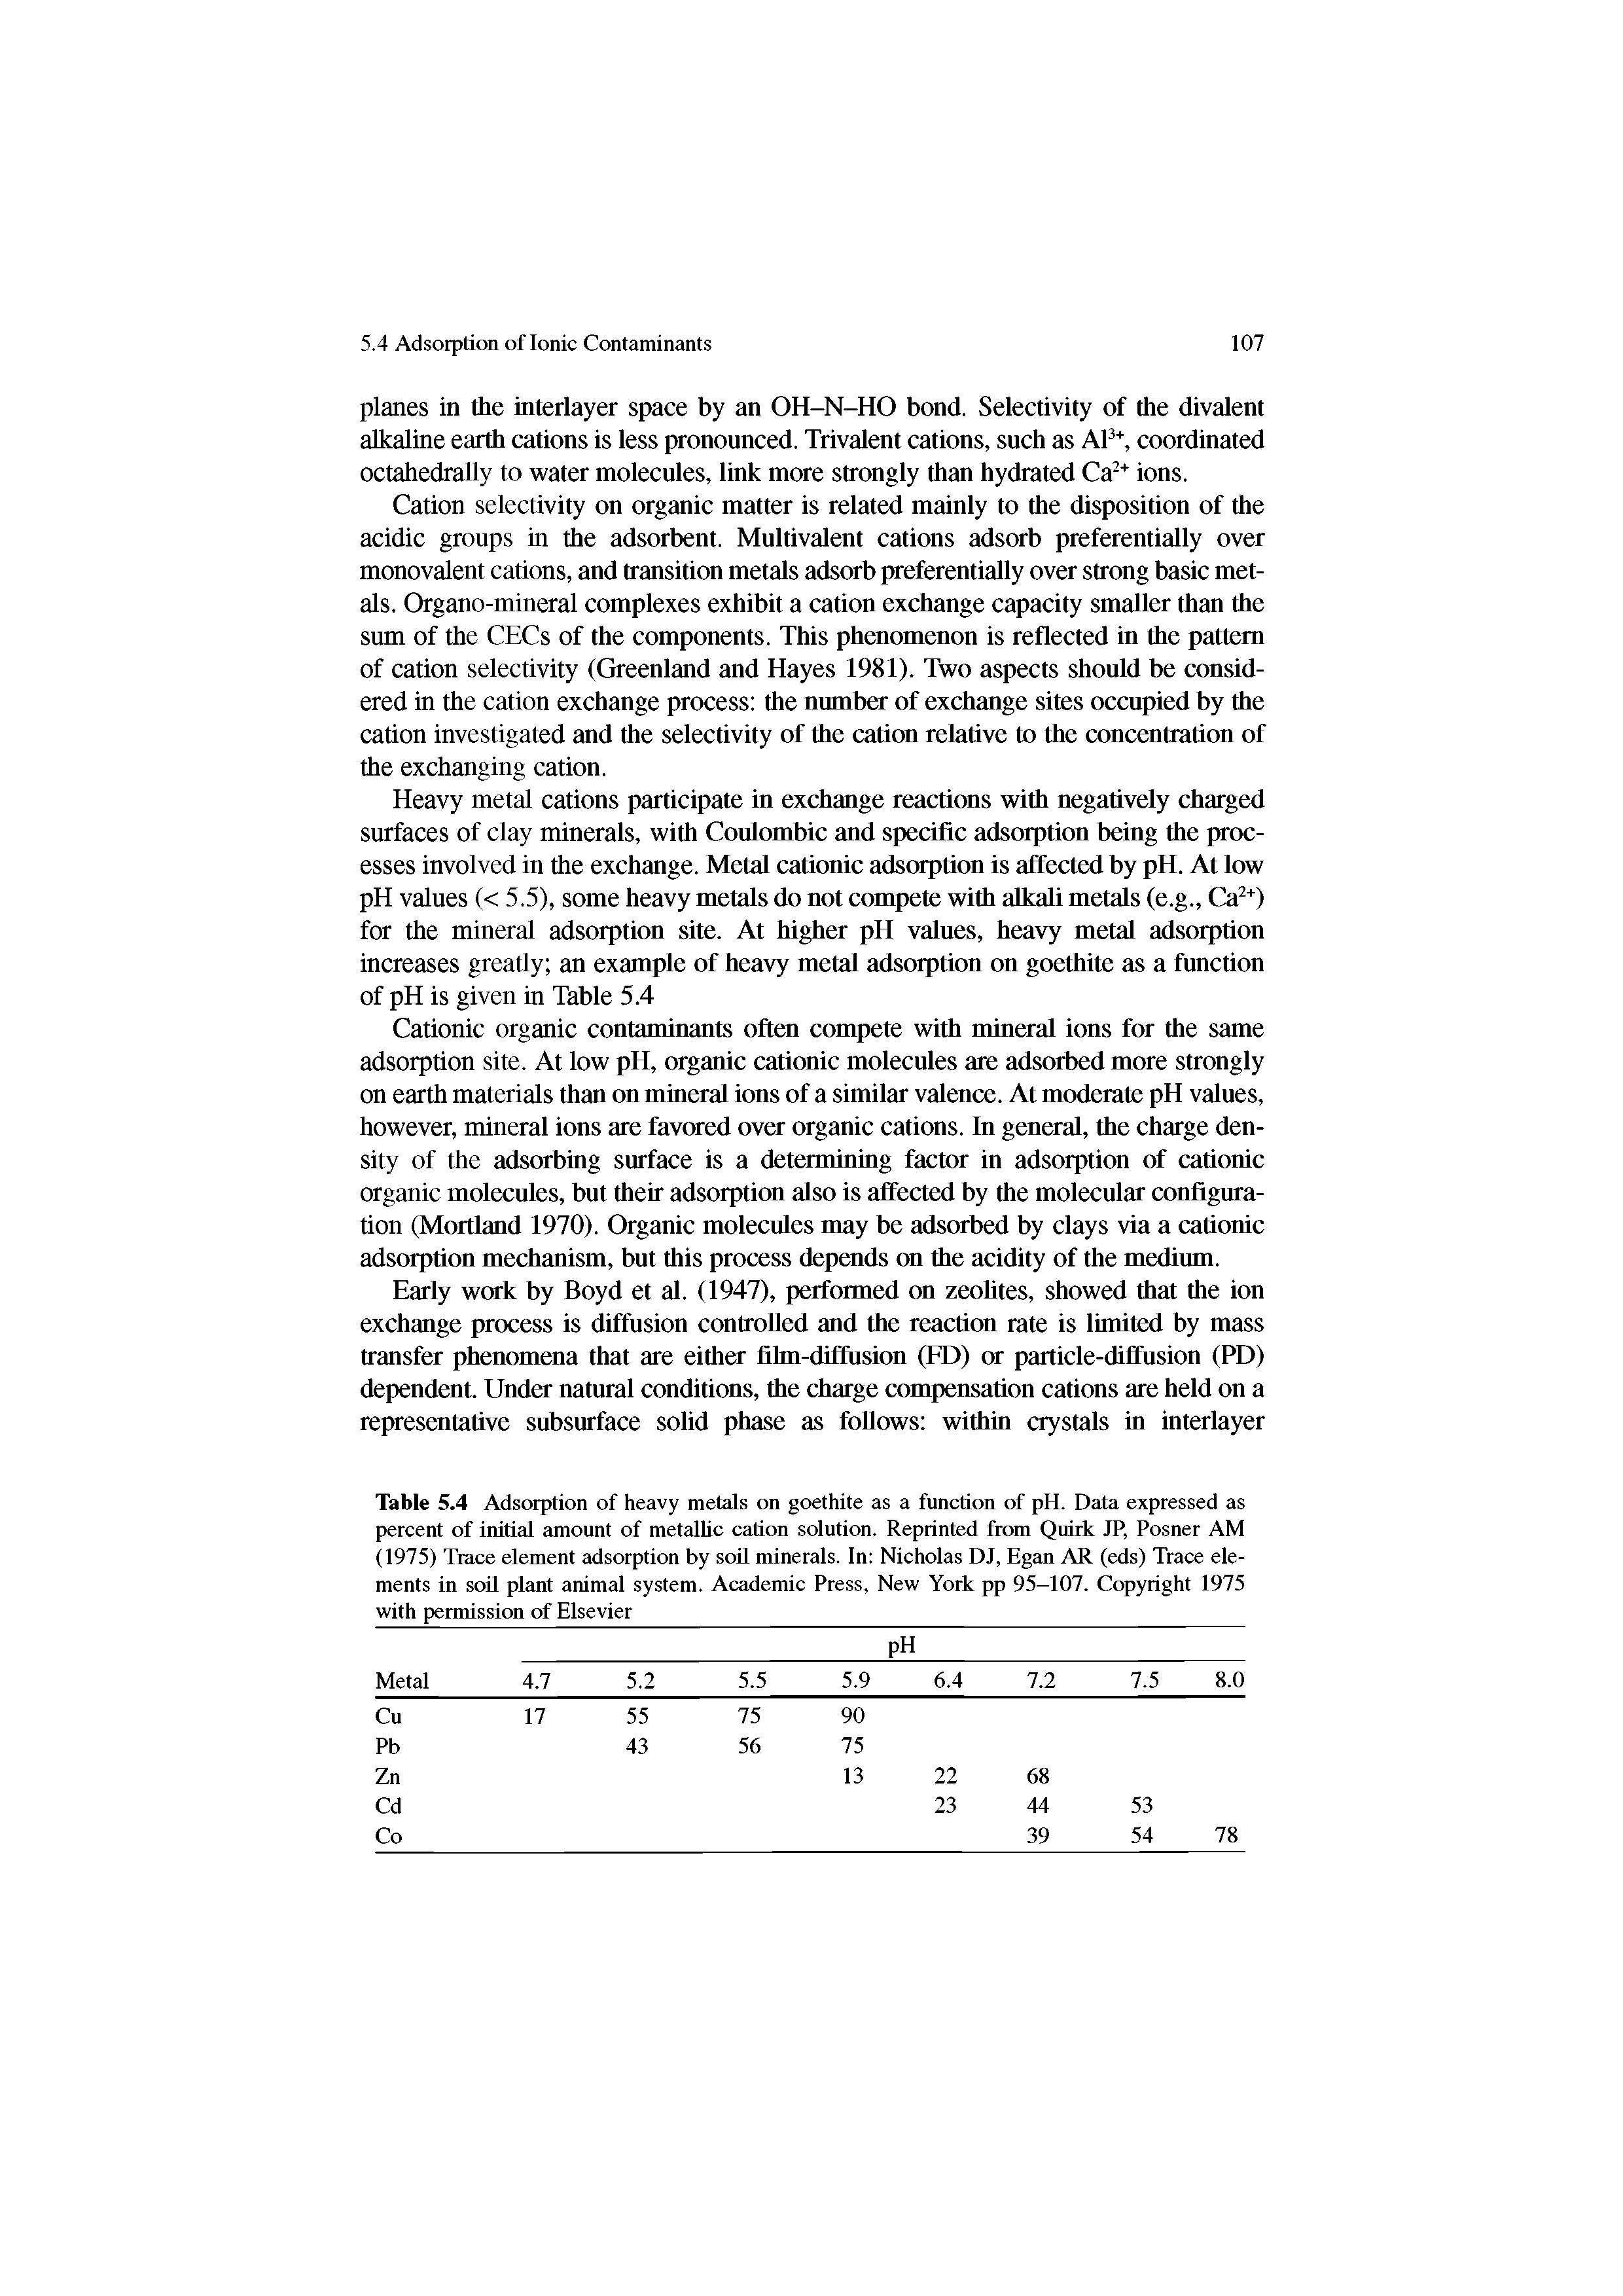 Table 5.4 Adsorption of heavy metals on goethite as a function of pH. Data expressed as percent of initial amount of metalhc cation solution. Reprinted from Quirk JP, Posner AM (1975) Trace element adsorption by soil minerals. In Nicholas DJ, Egan AR (eds) Trace elements in soil plant animal system. Academic Press, New York pp 95-107. Copyright 1975 with permission of Elsevier...